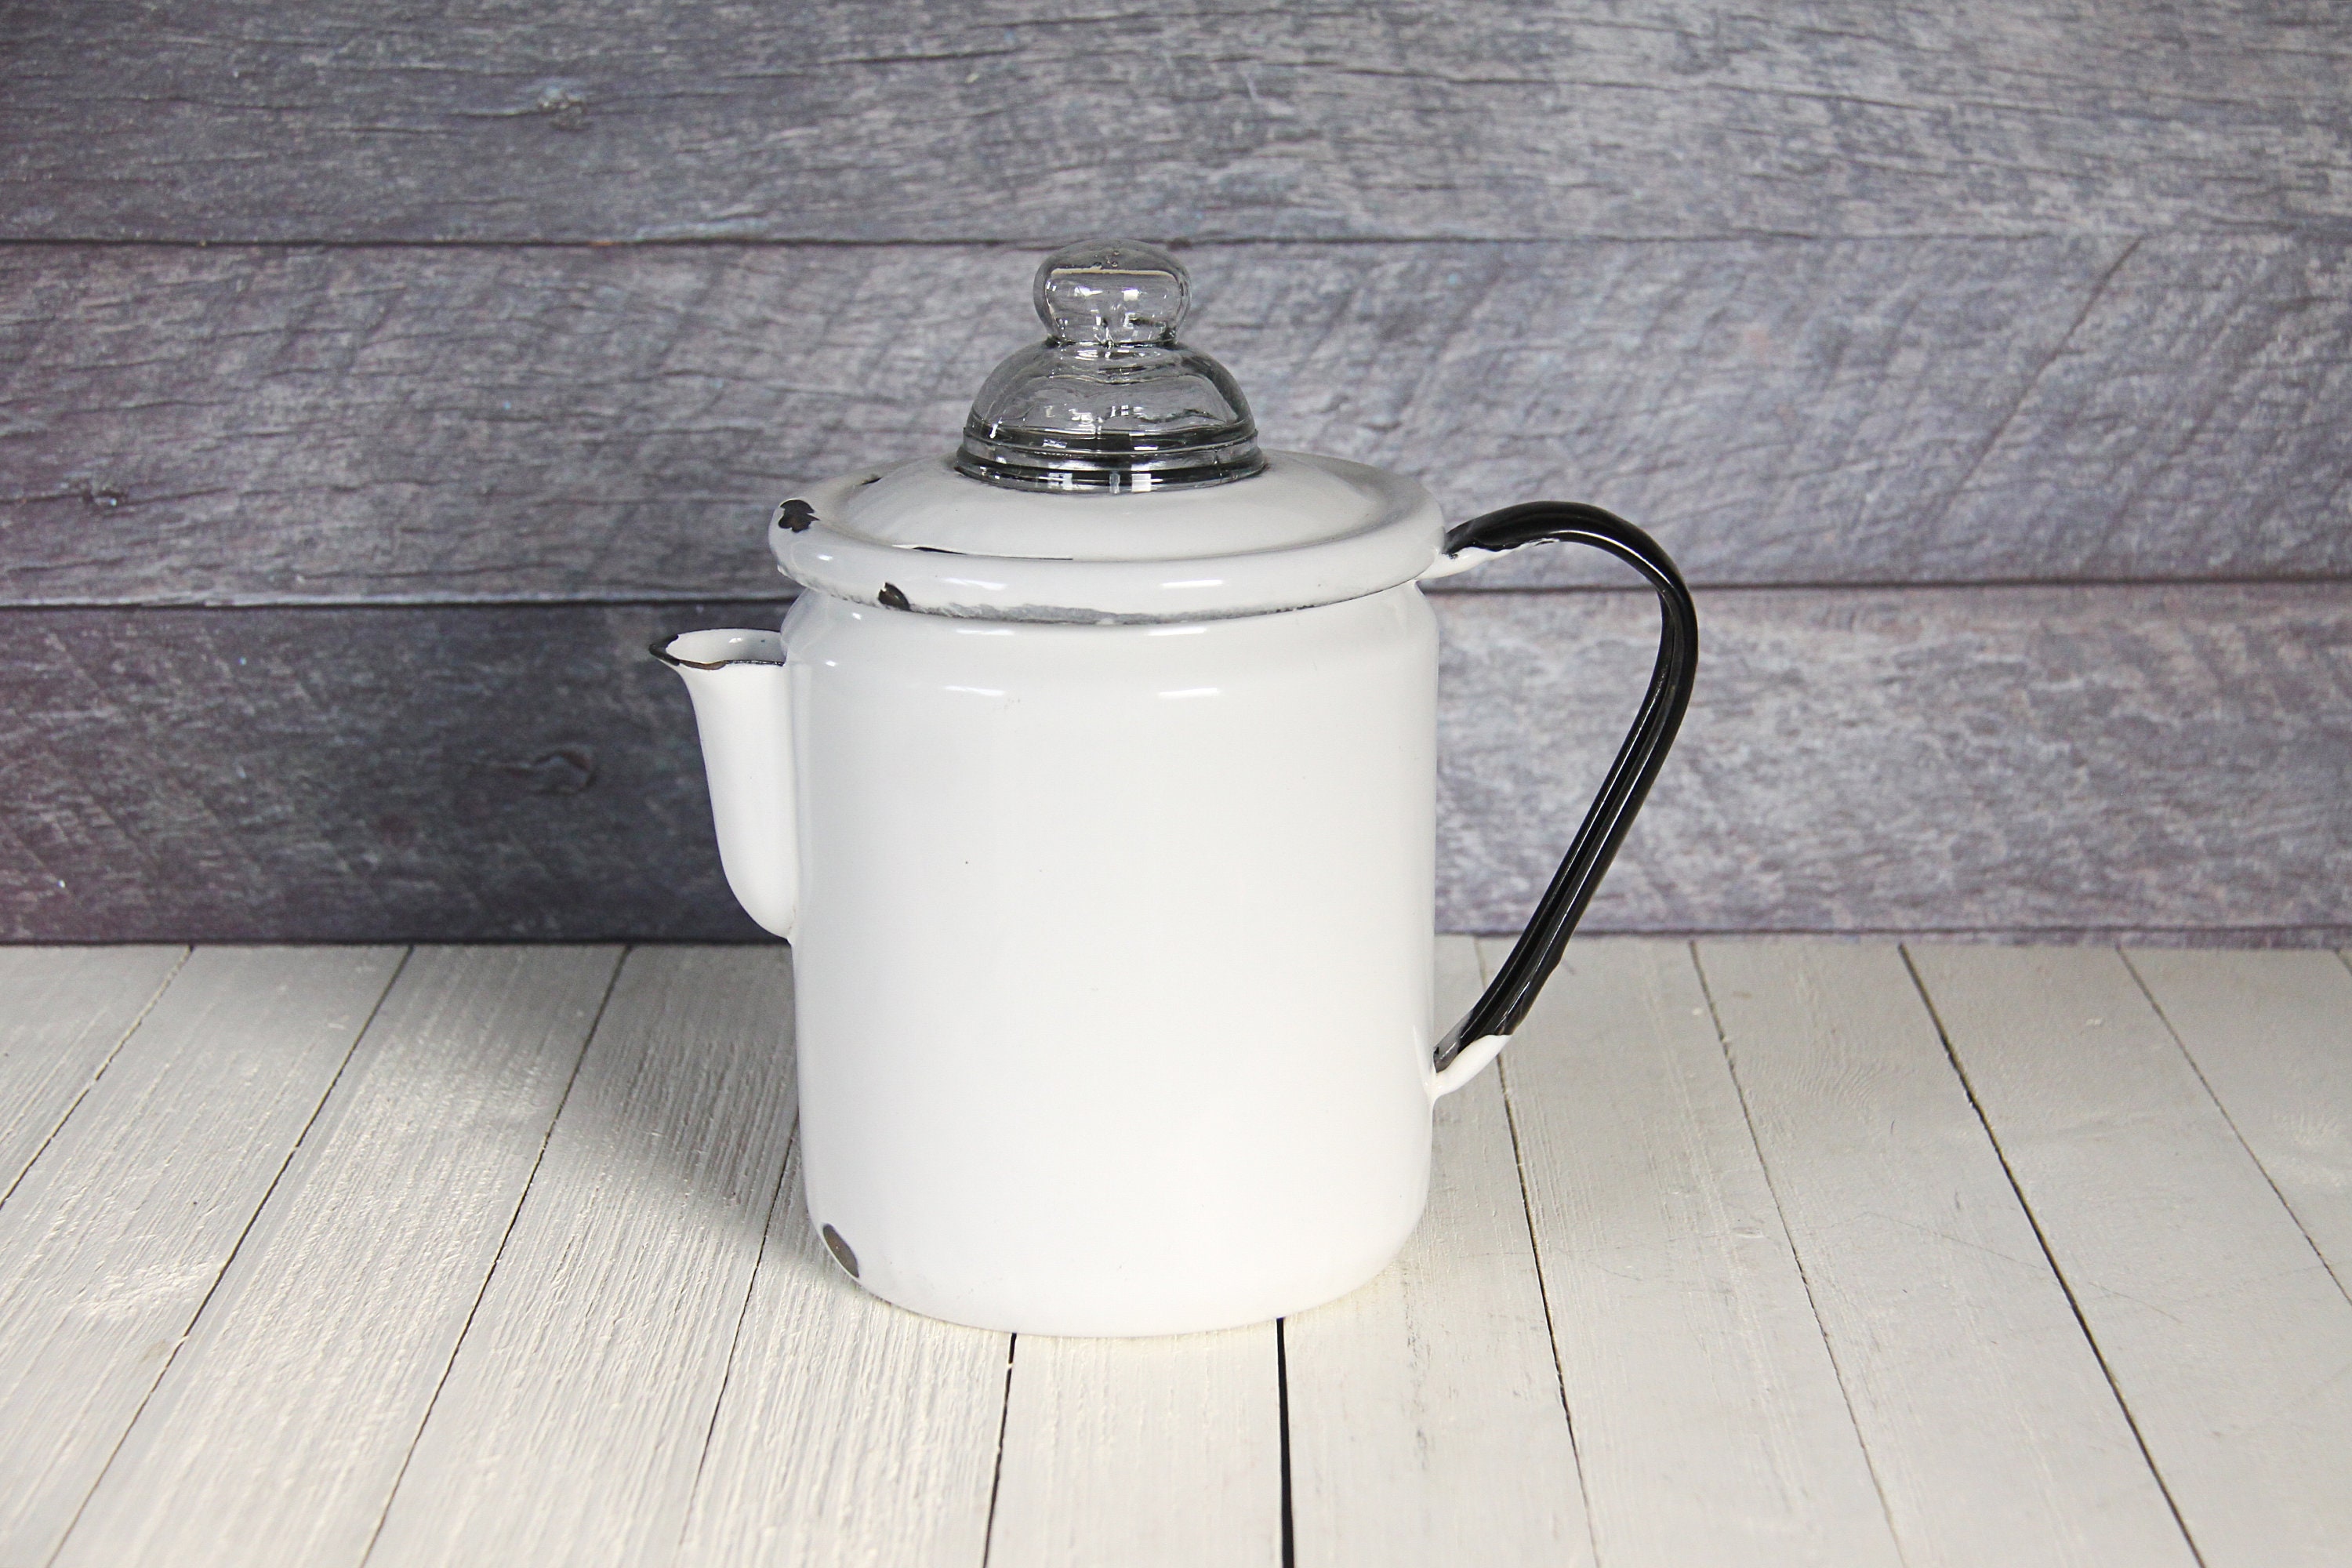 Vintage Gemco Brand Glass Coffee Percolator With Plastic Interior, 6 Cups,  Made in the USA, 3-15 